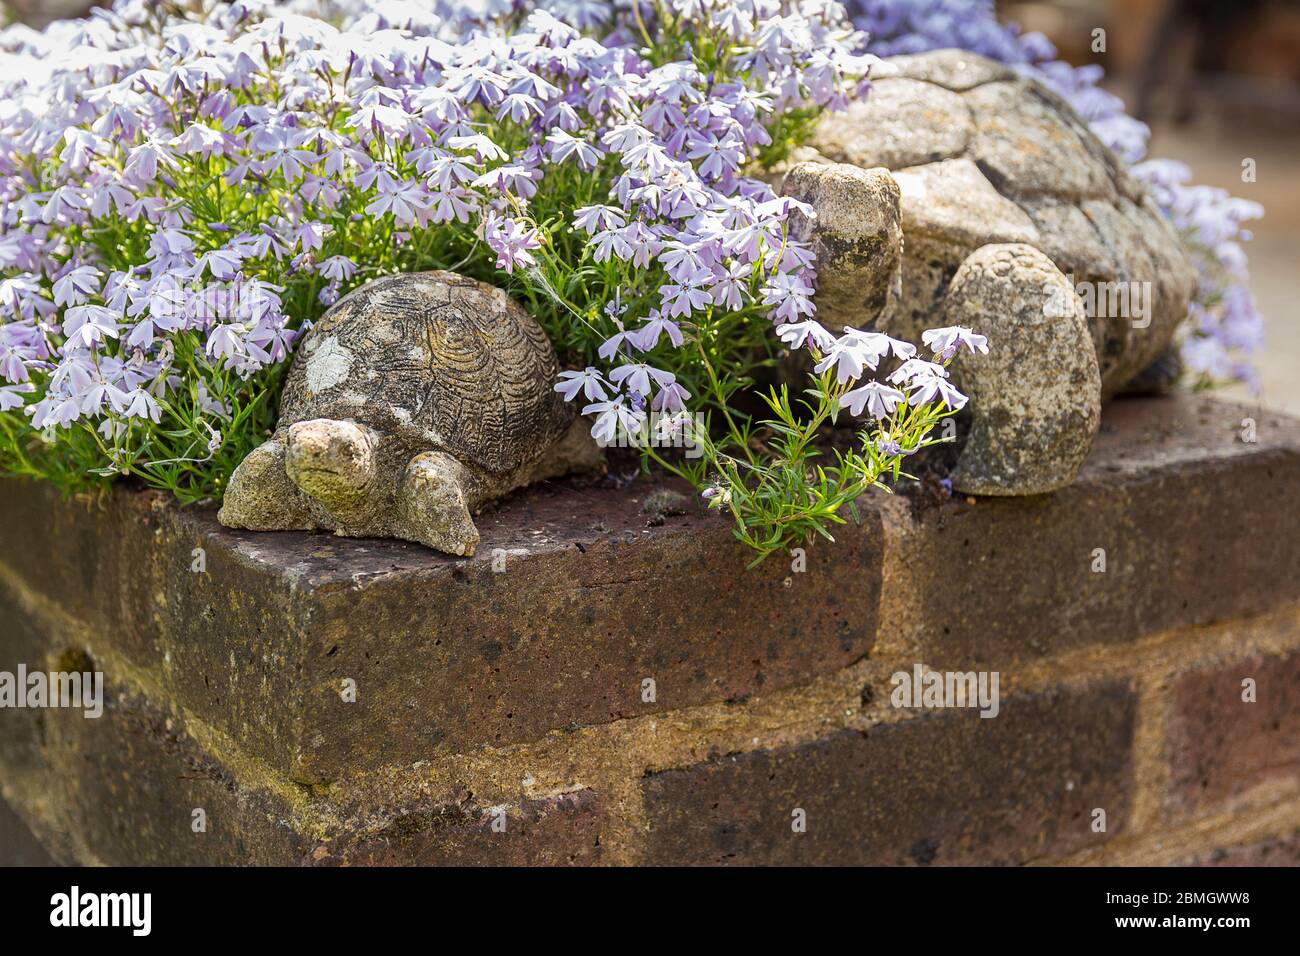 Garden soil filled low wall planted with various flowering plants and decorated with old concrete animals like these weathered tortoises. Stock Photo